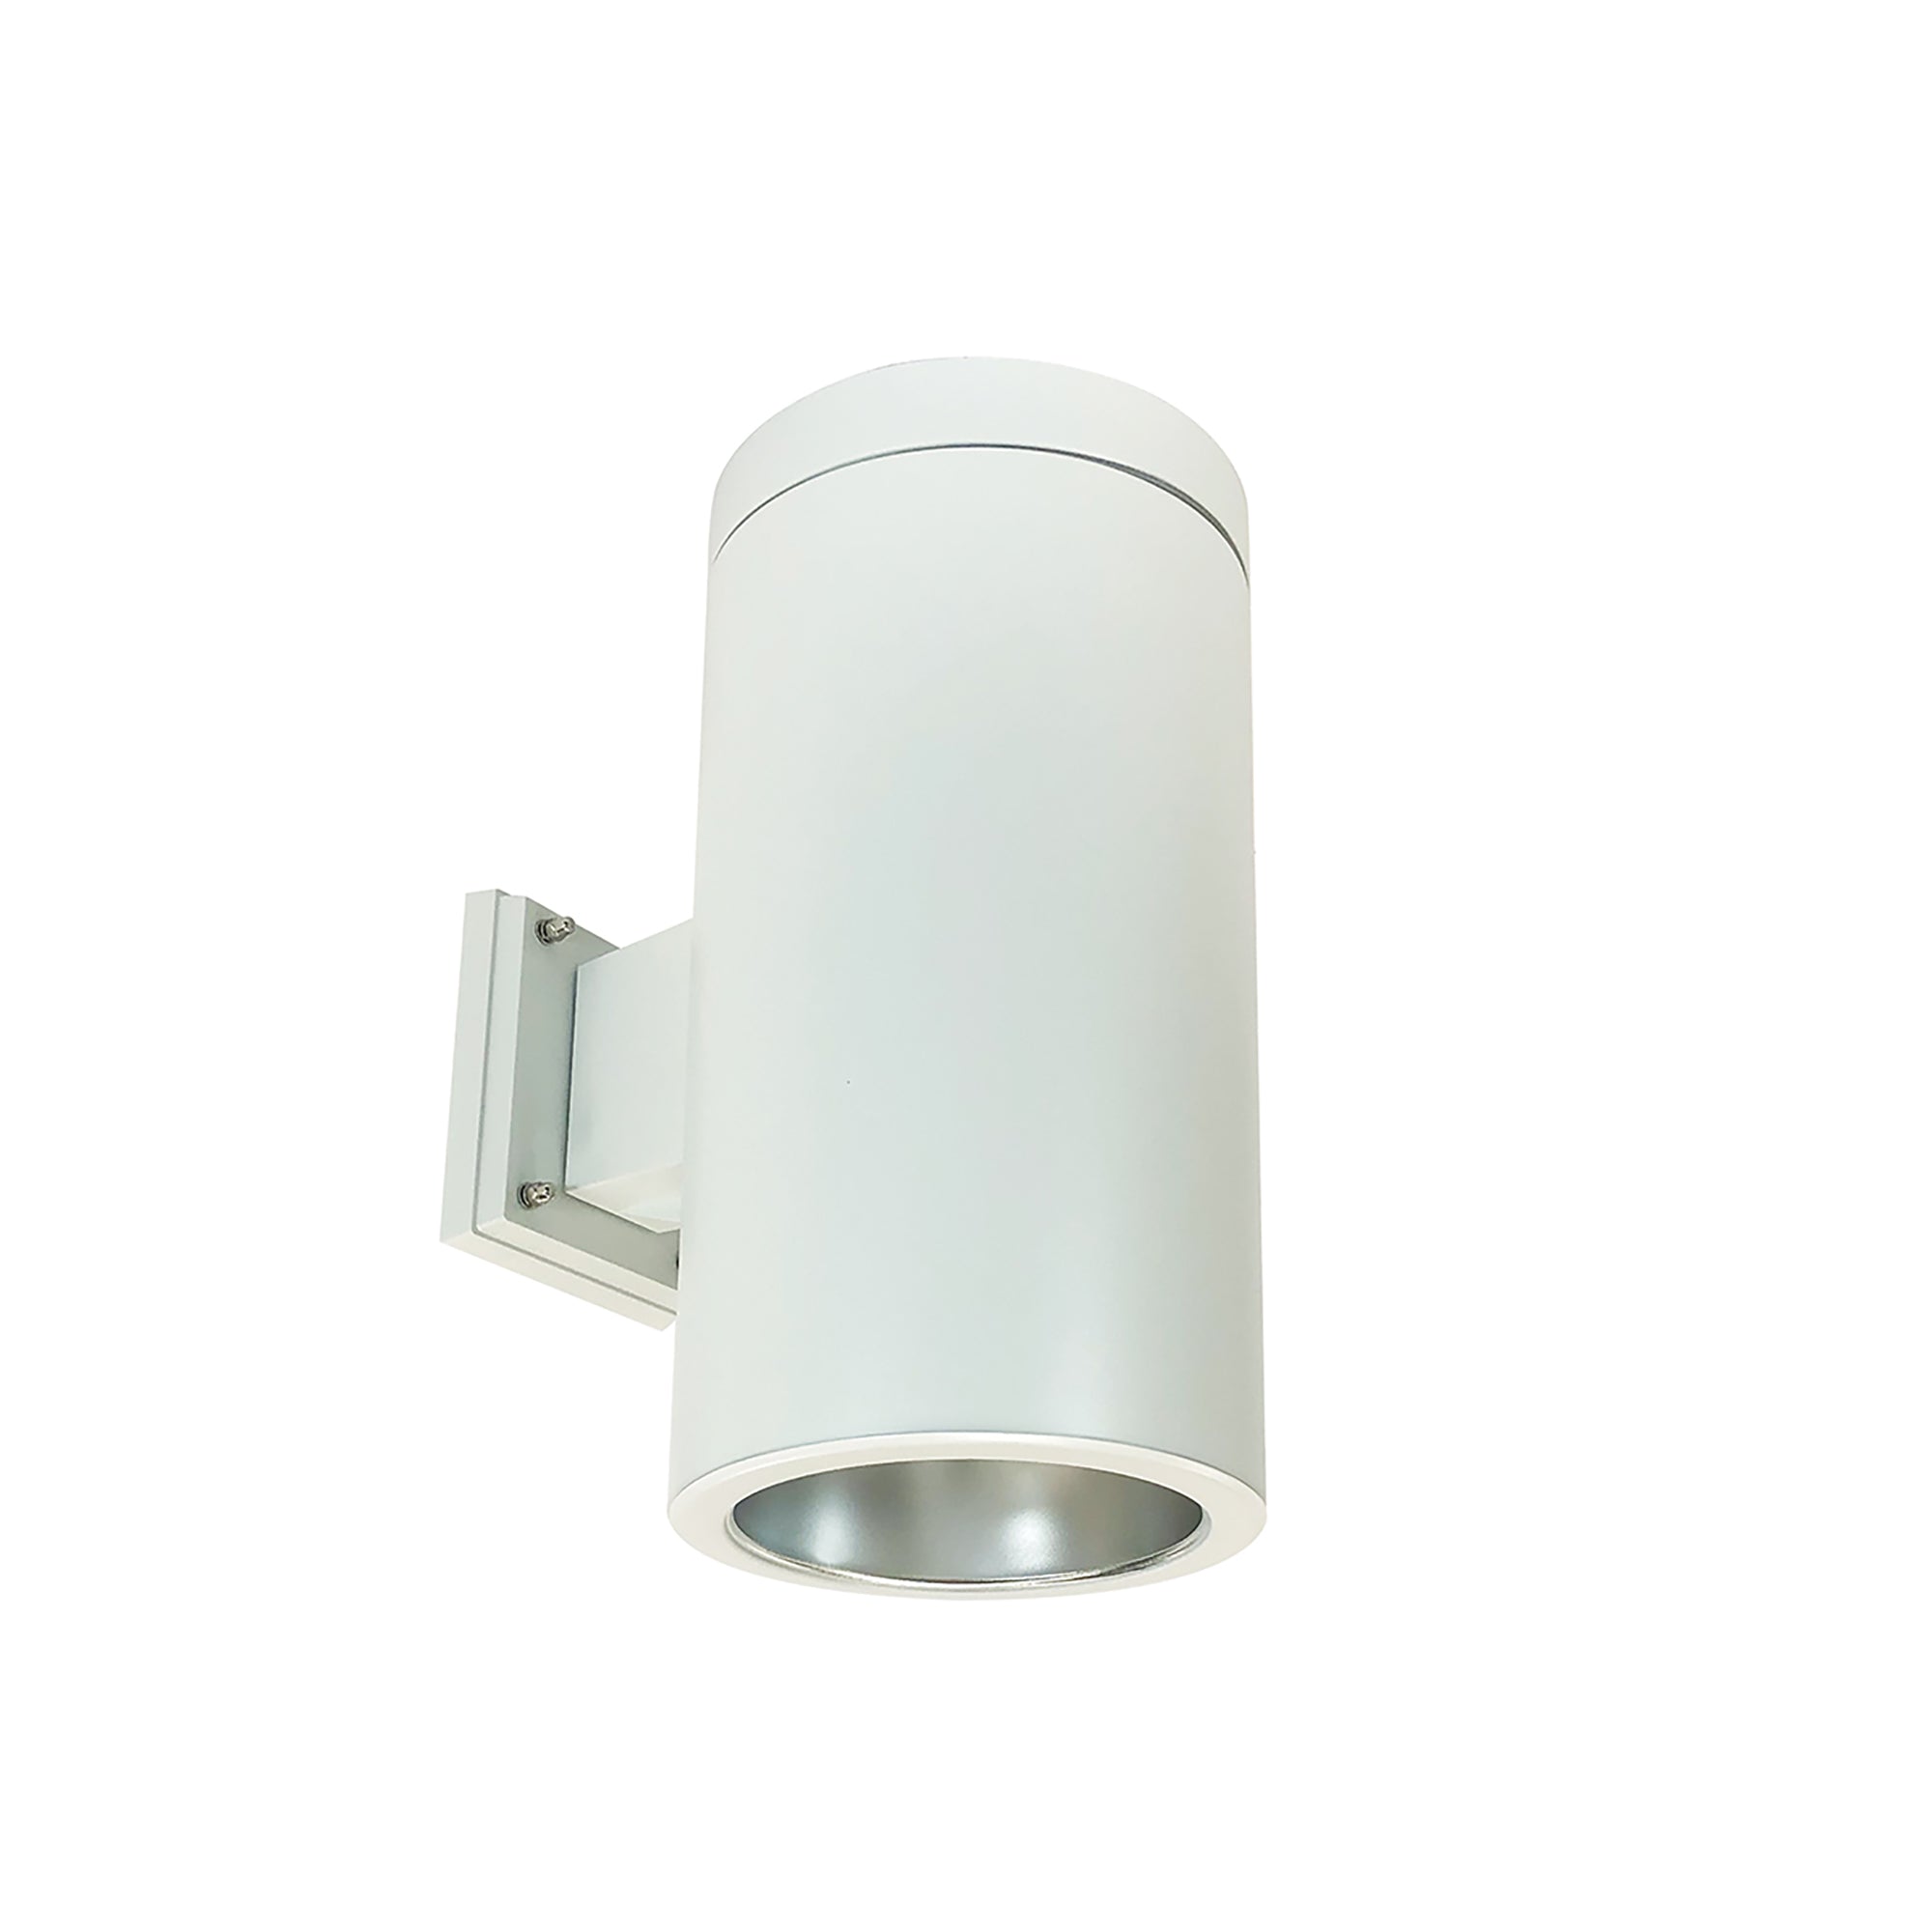 Nora Lighting NYLS2-6W35130SDWW6 - Cylinder - 6 Inch CYL WALL MNT 3500L 35K REF. FLD. DIFF/WH FLANGE 120-277V 0-10V WH CYL